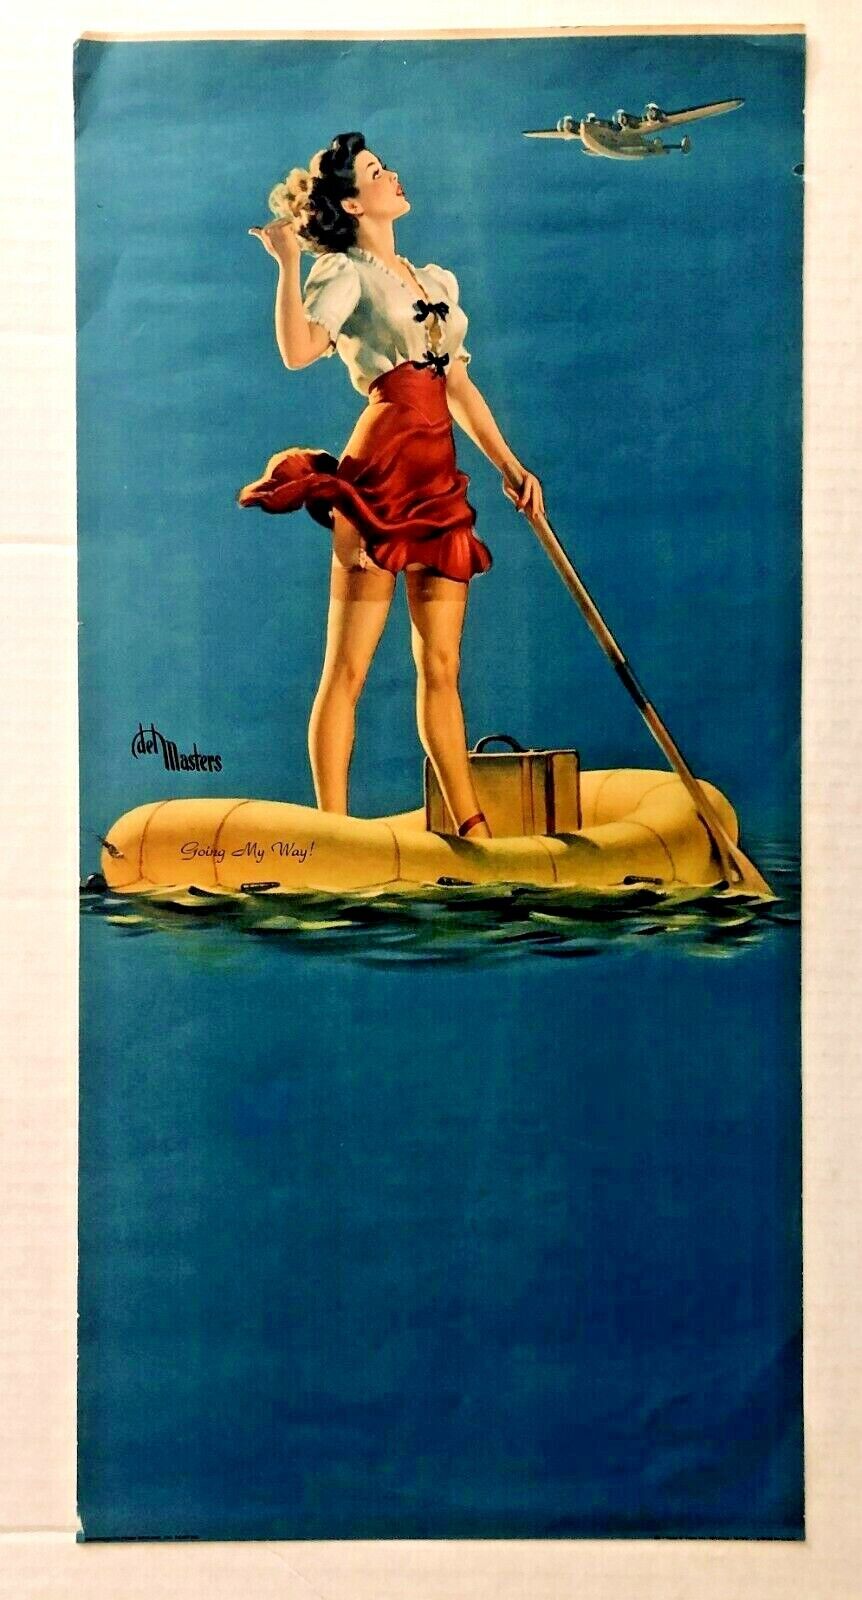 Nice 1940\'s Pinup Girl Picture by Del Masters - Going My Way - Woman on Raft